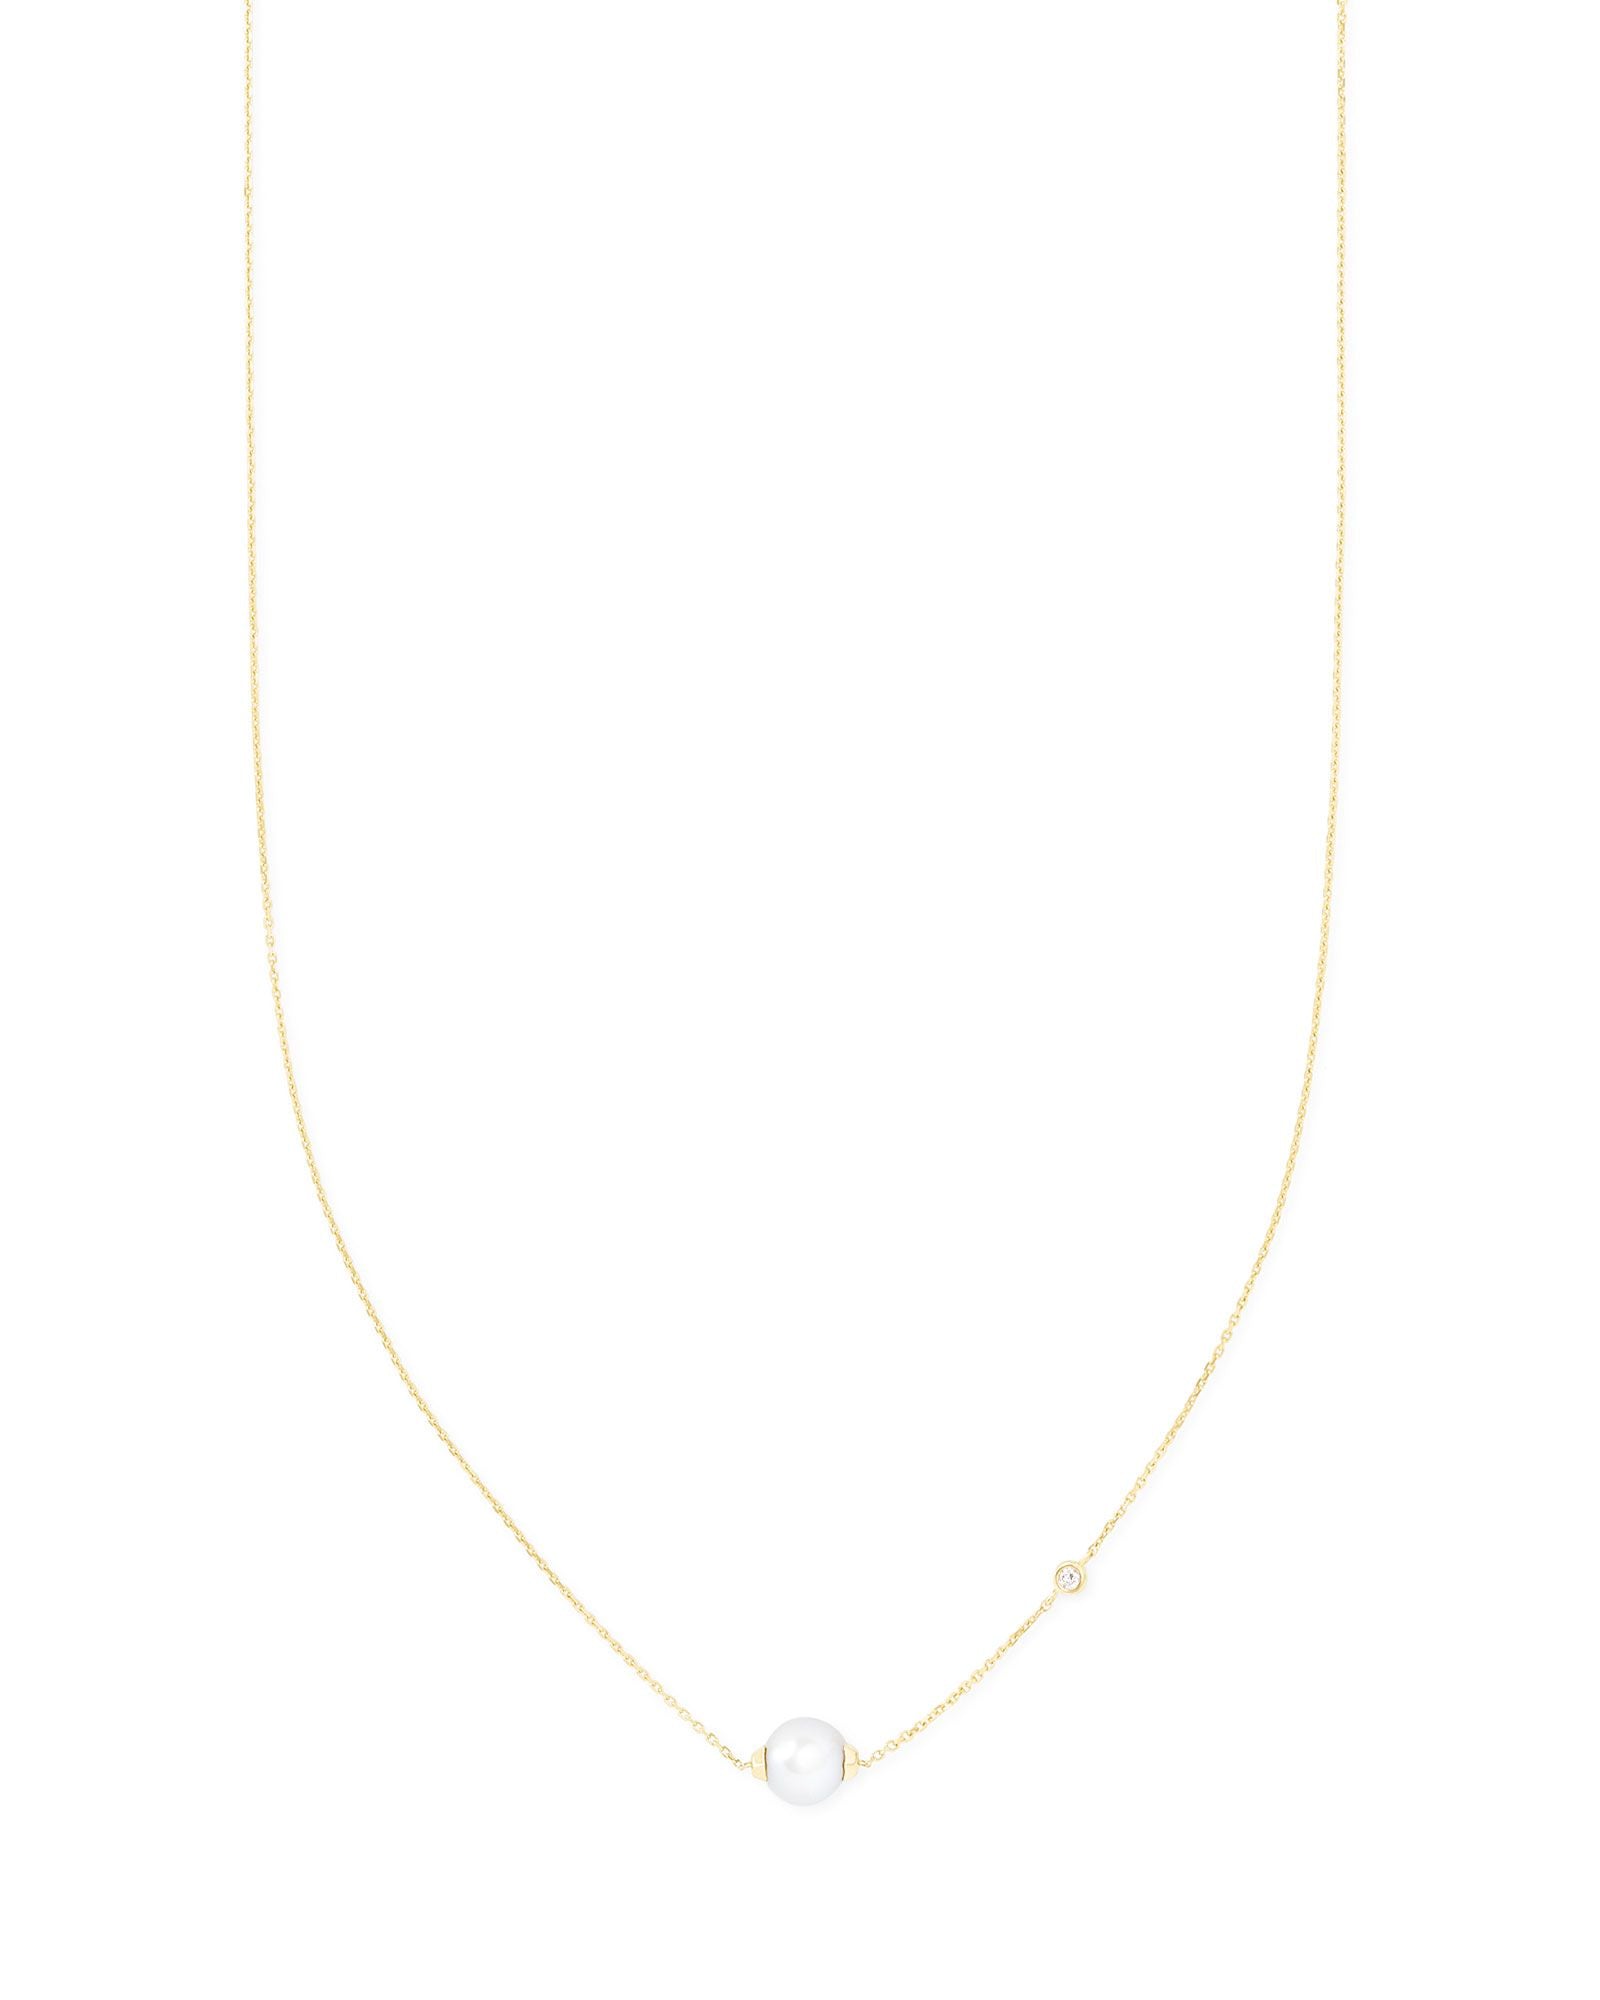 Fine Jewelry Collections in 14k Gold | Kendra Scott